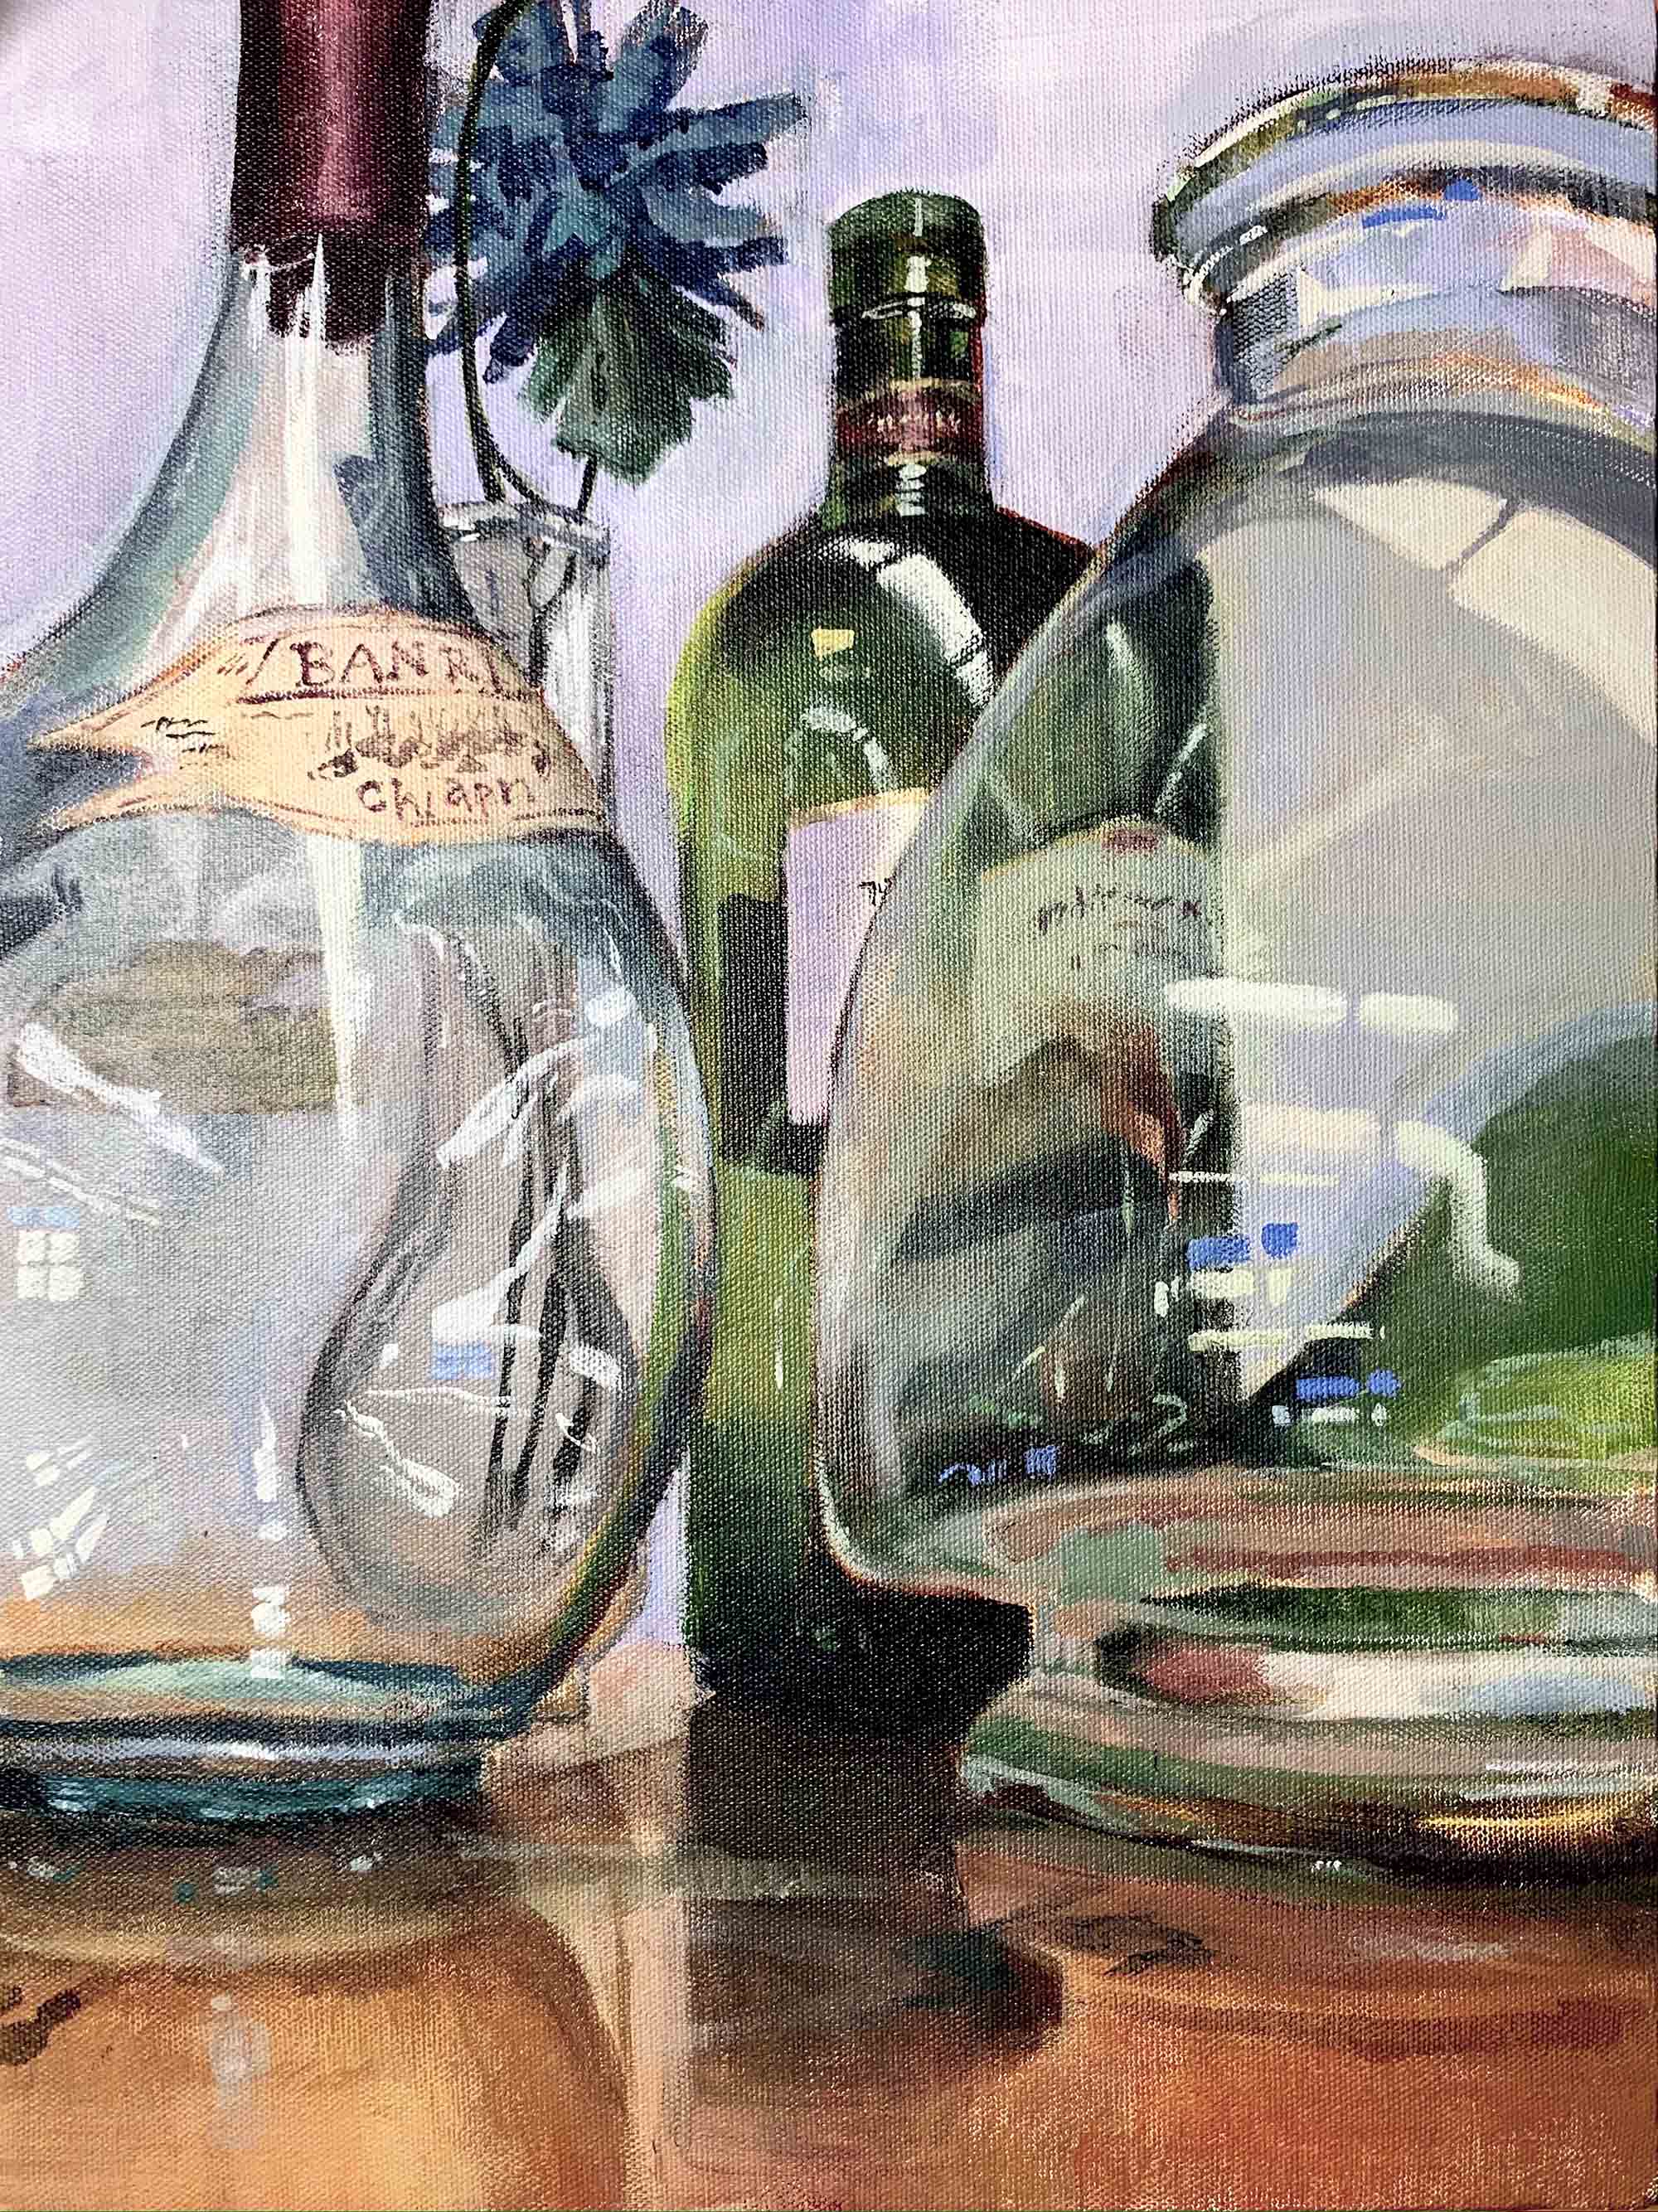 A painting of jars on a table